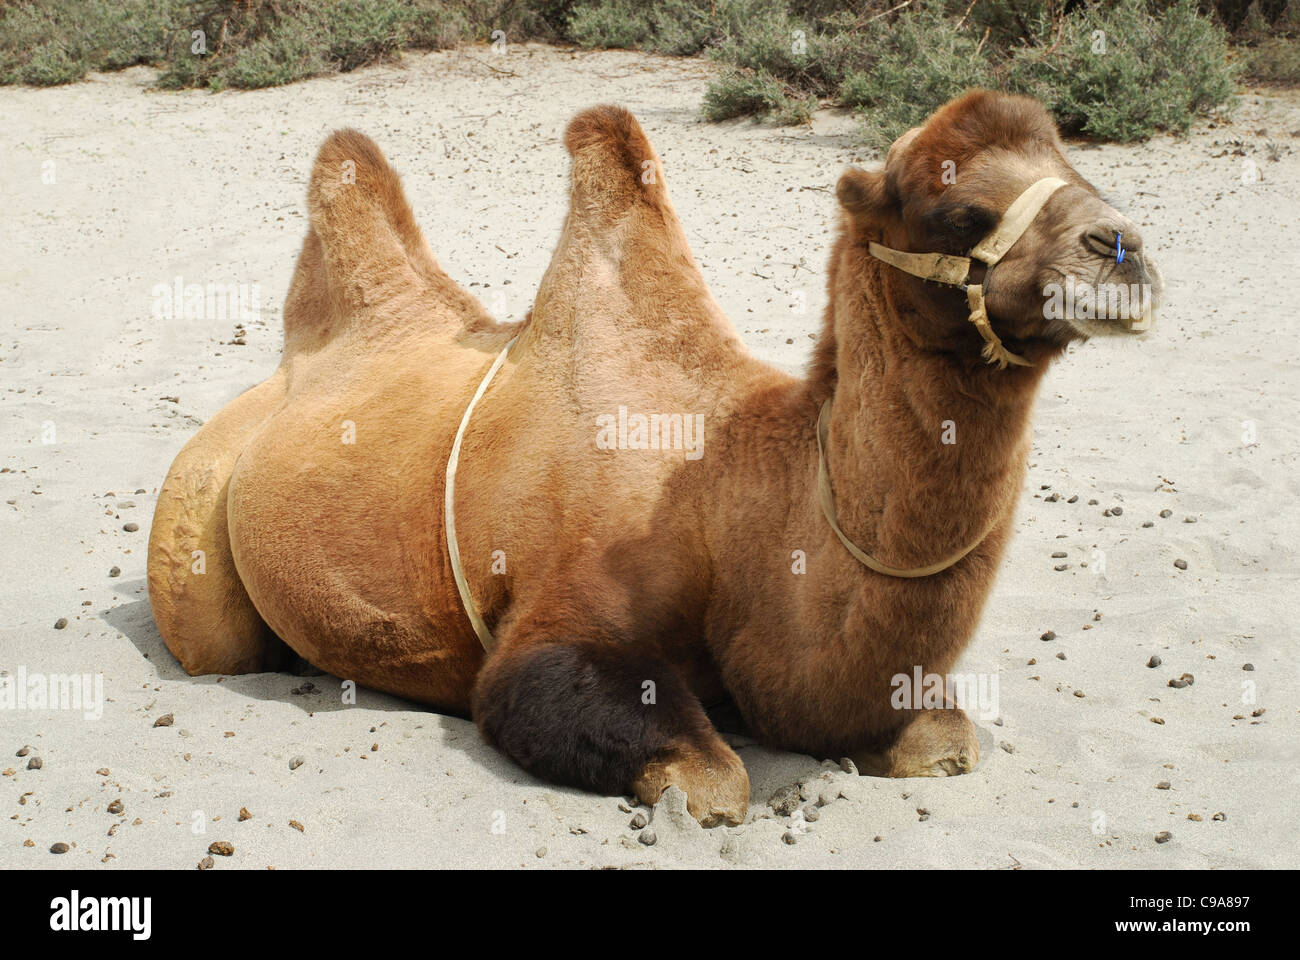 A Shaggy Bactrian (two- humped) camel which are shorter and stouter. Their humps are plump and pliable and collapse in winter wh Stock Photo